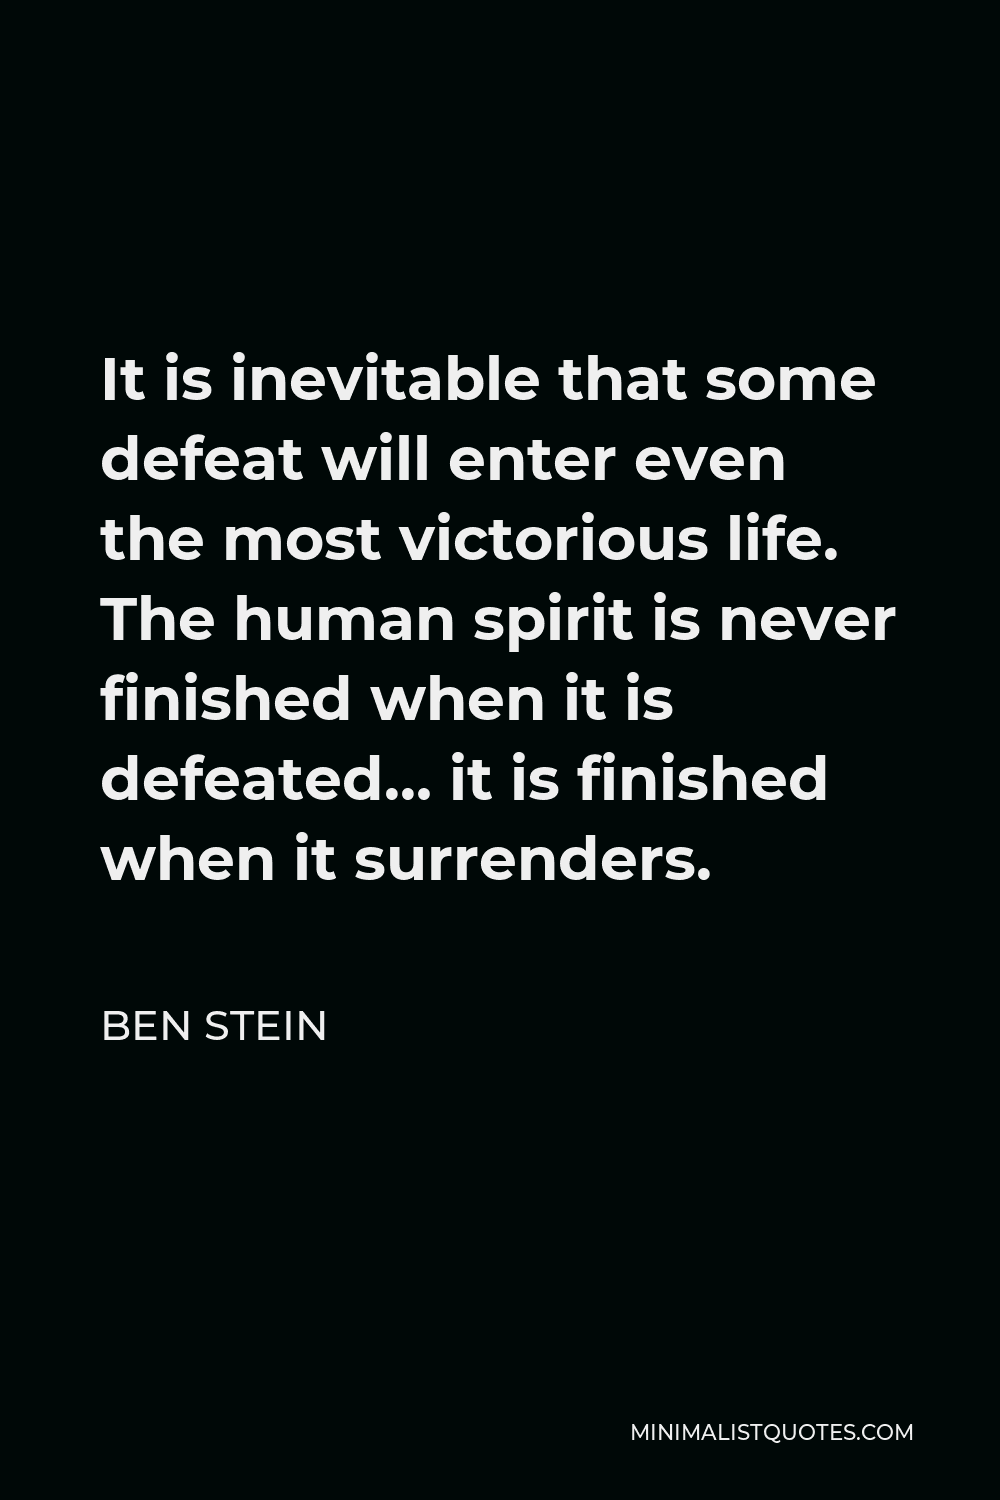 Ben Stein Quote - It is inevitable that some defeat will enter even the most victorious life. The human spirit is never finished when it is defeated… it is finished when it surrenders.